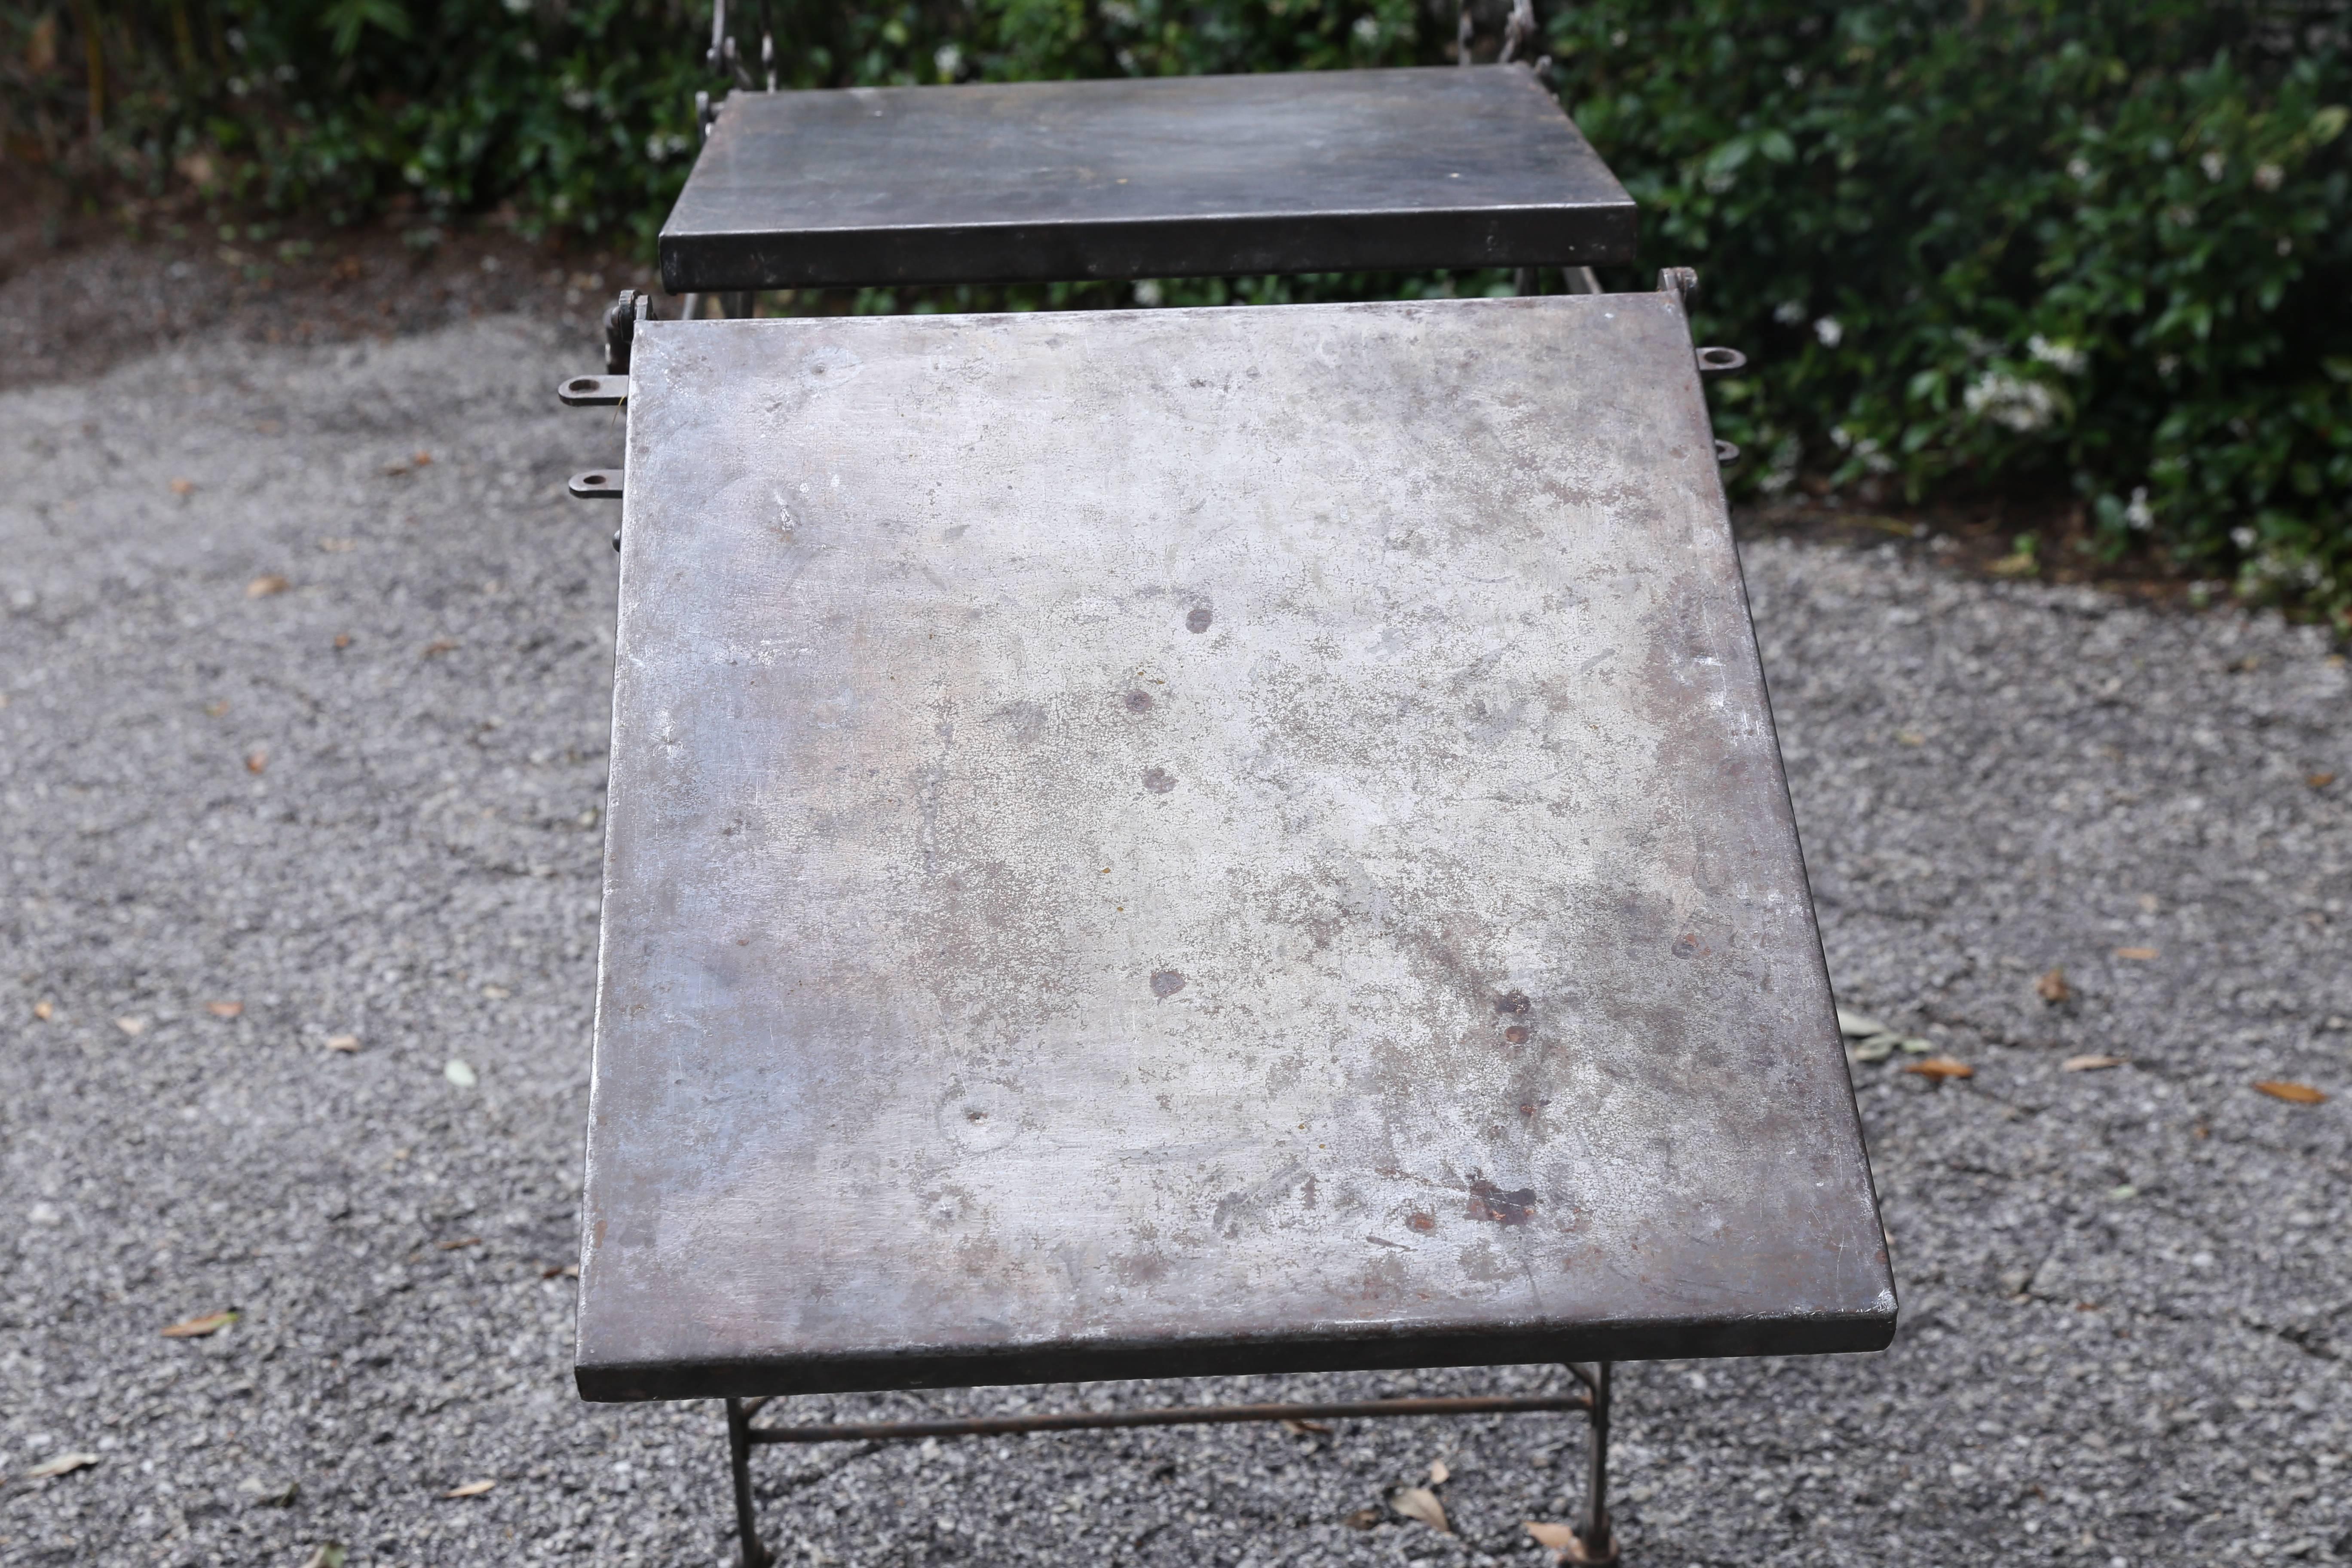 Wonderful old metal medical table used for field operations and examinations by the French Military, circa 1940. Legs and backrests are adjustable (leg section can be fully dropped down; backrest can go to a flat and reclining position) and the legs